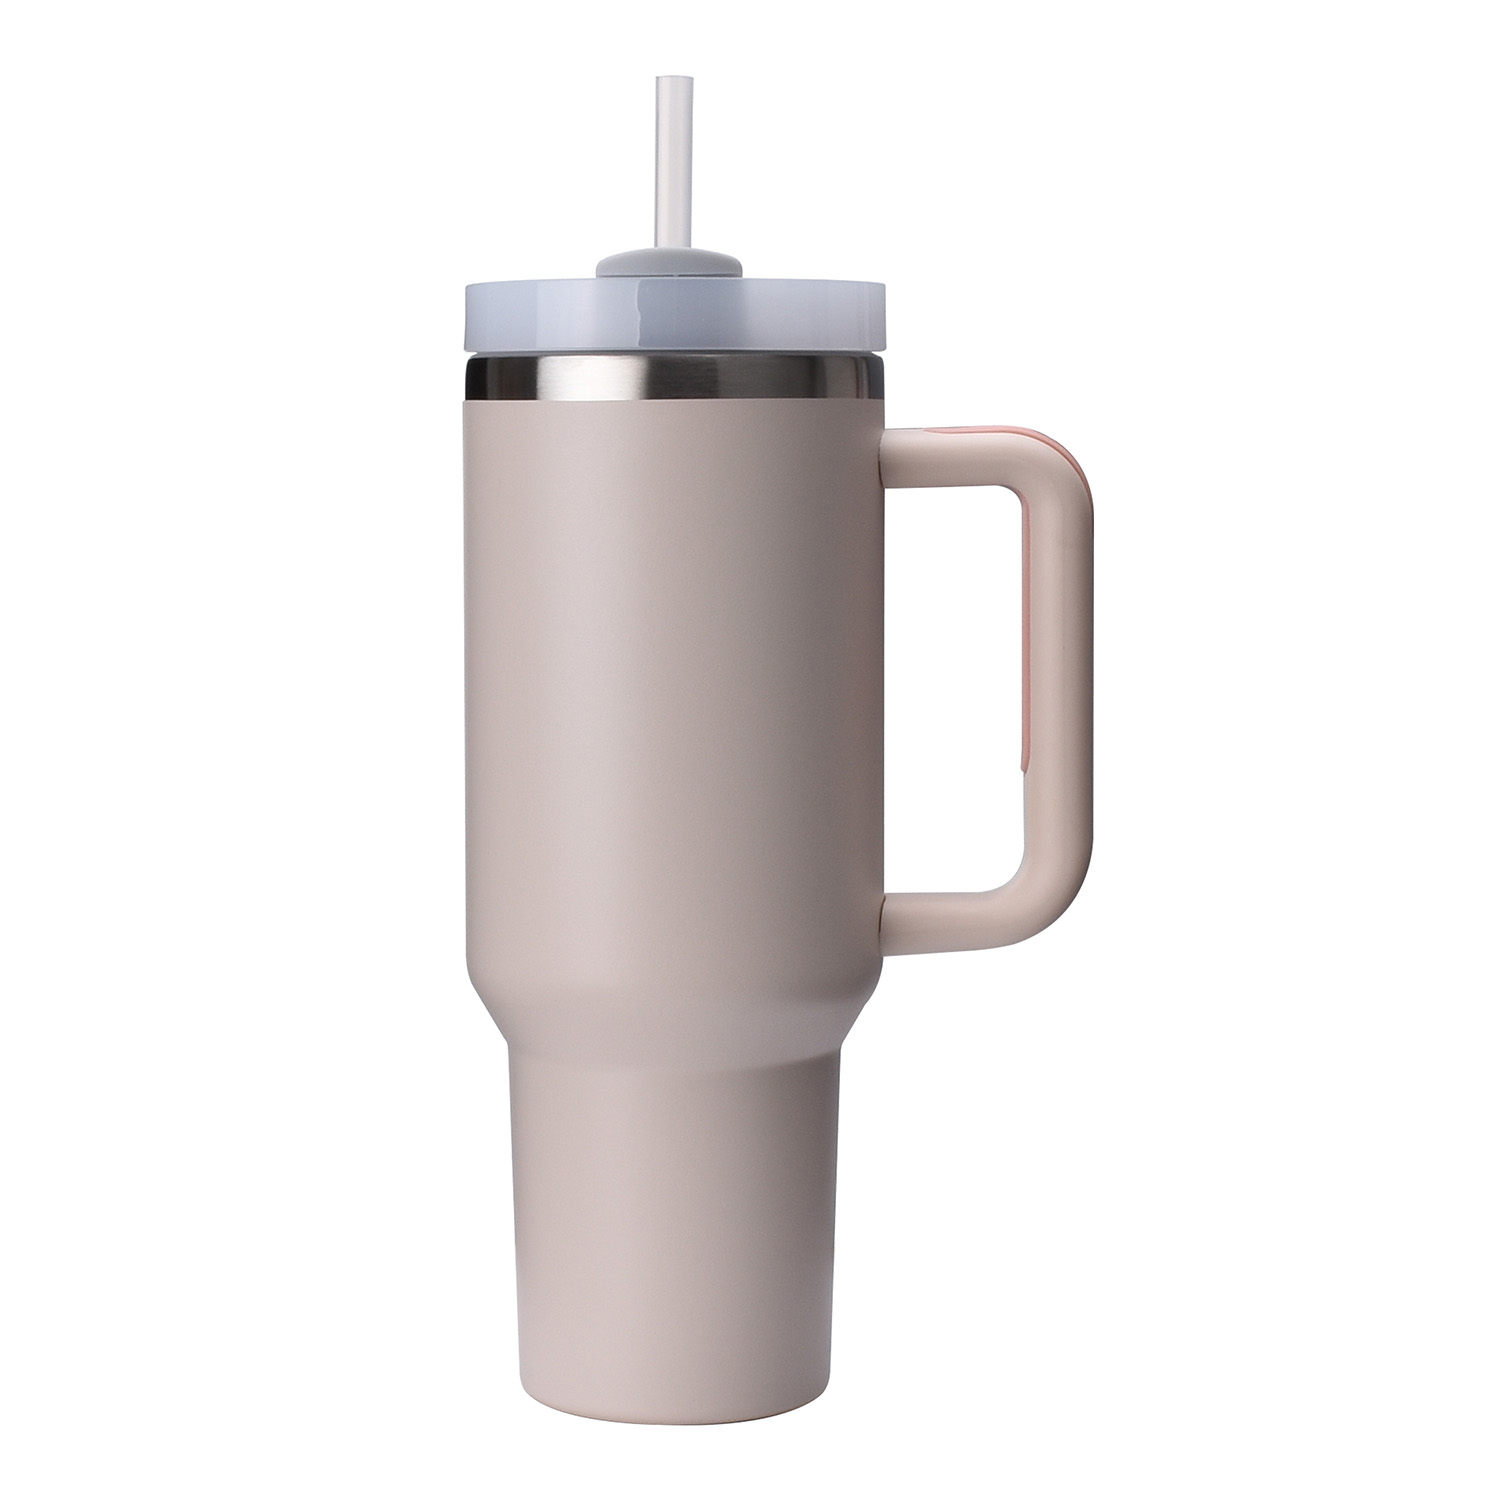 https://www.waterbottle.tech/wp-content/uploads/2023/04/Stanley-Quencher-H2.0-Custom-Design-40oz-tumbler-with-handle-straw-lid-s214098-1.jpg